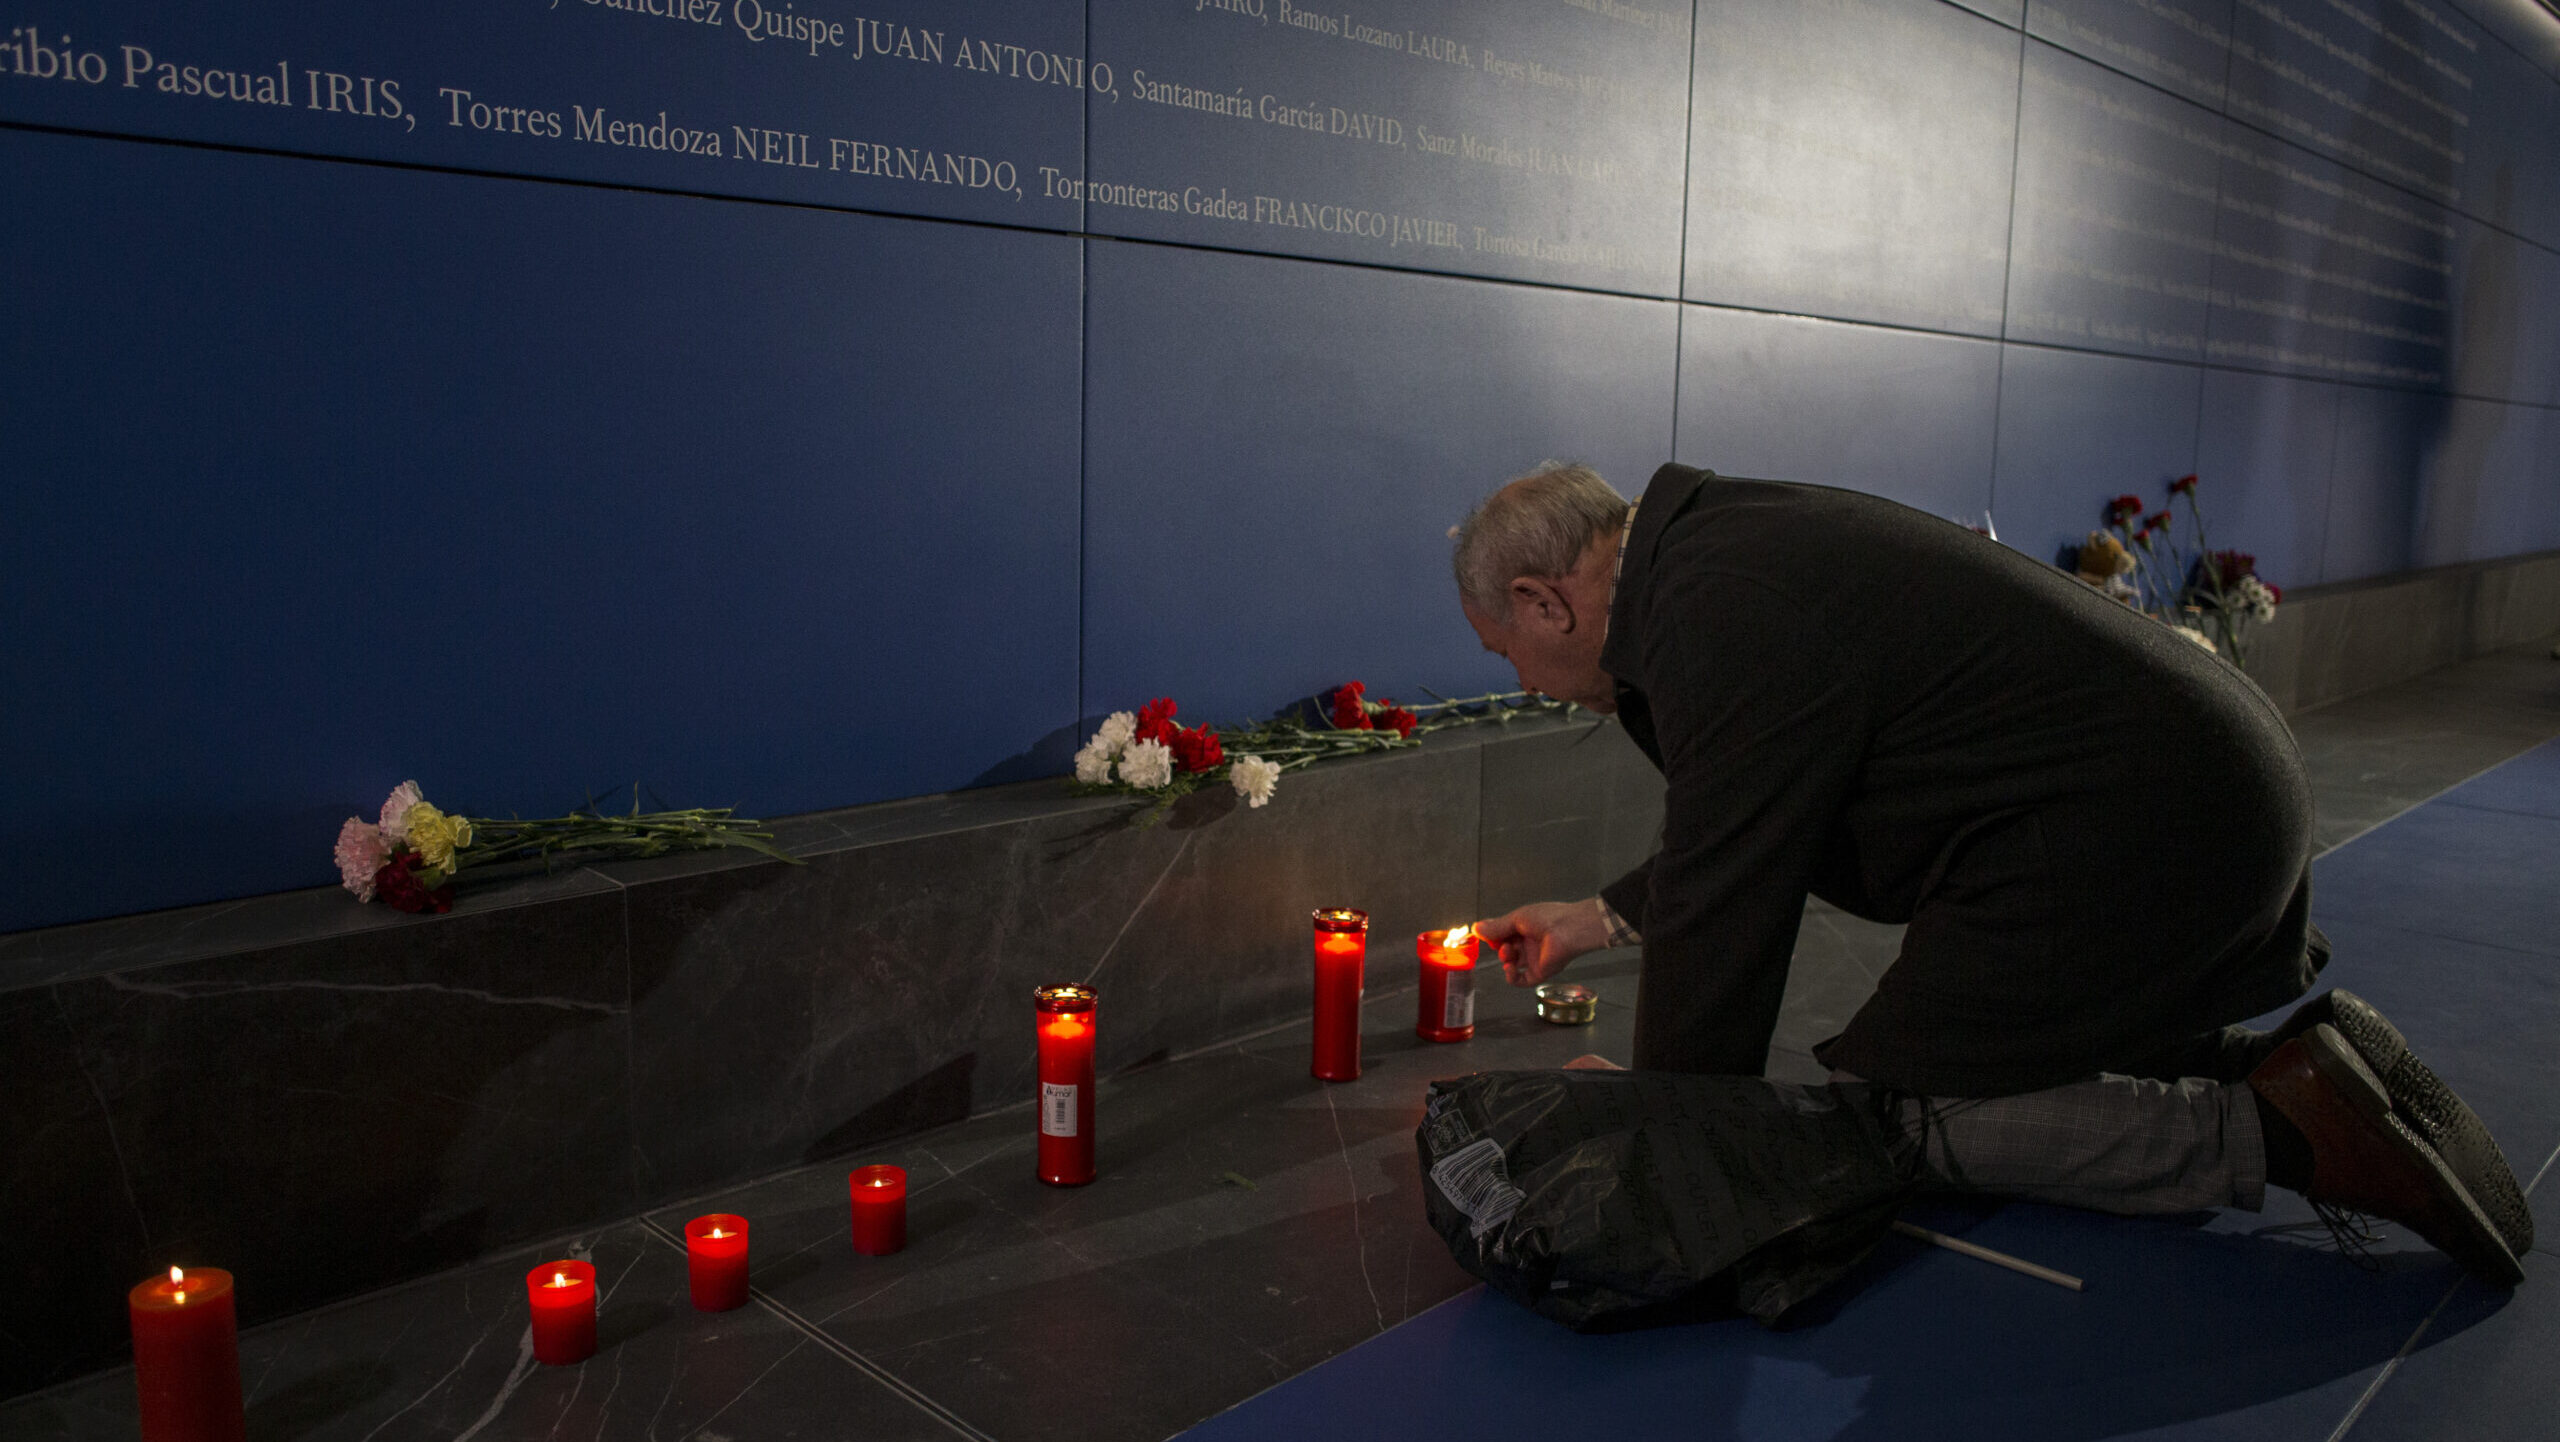 Two Decades Since 11M: Europe’s Ongoing Battle Against Jihadi Radicalization